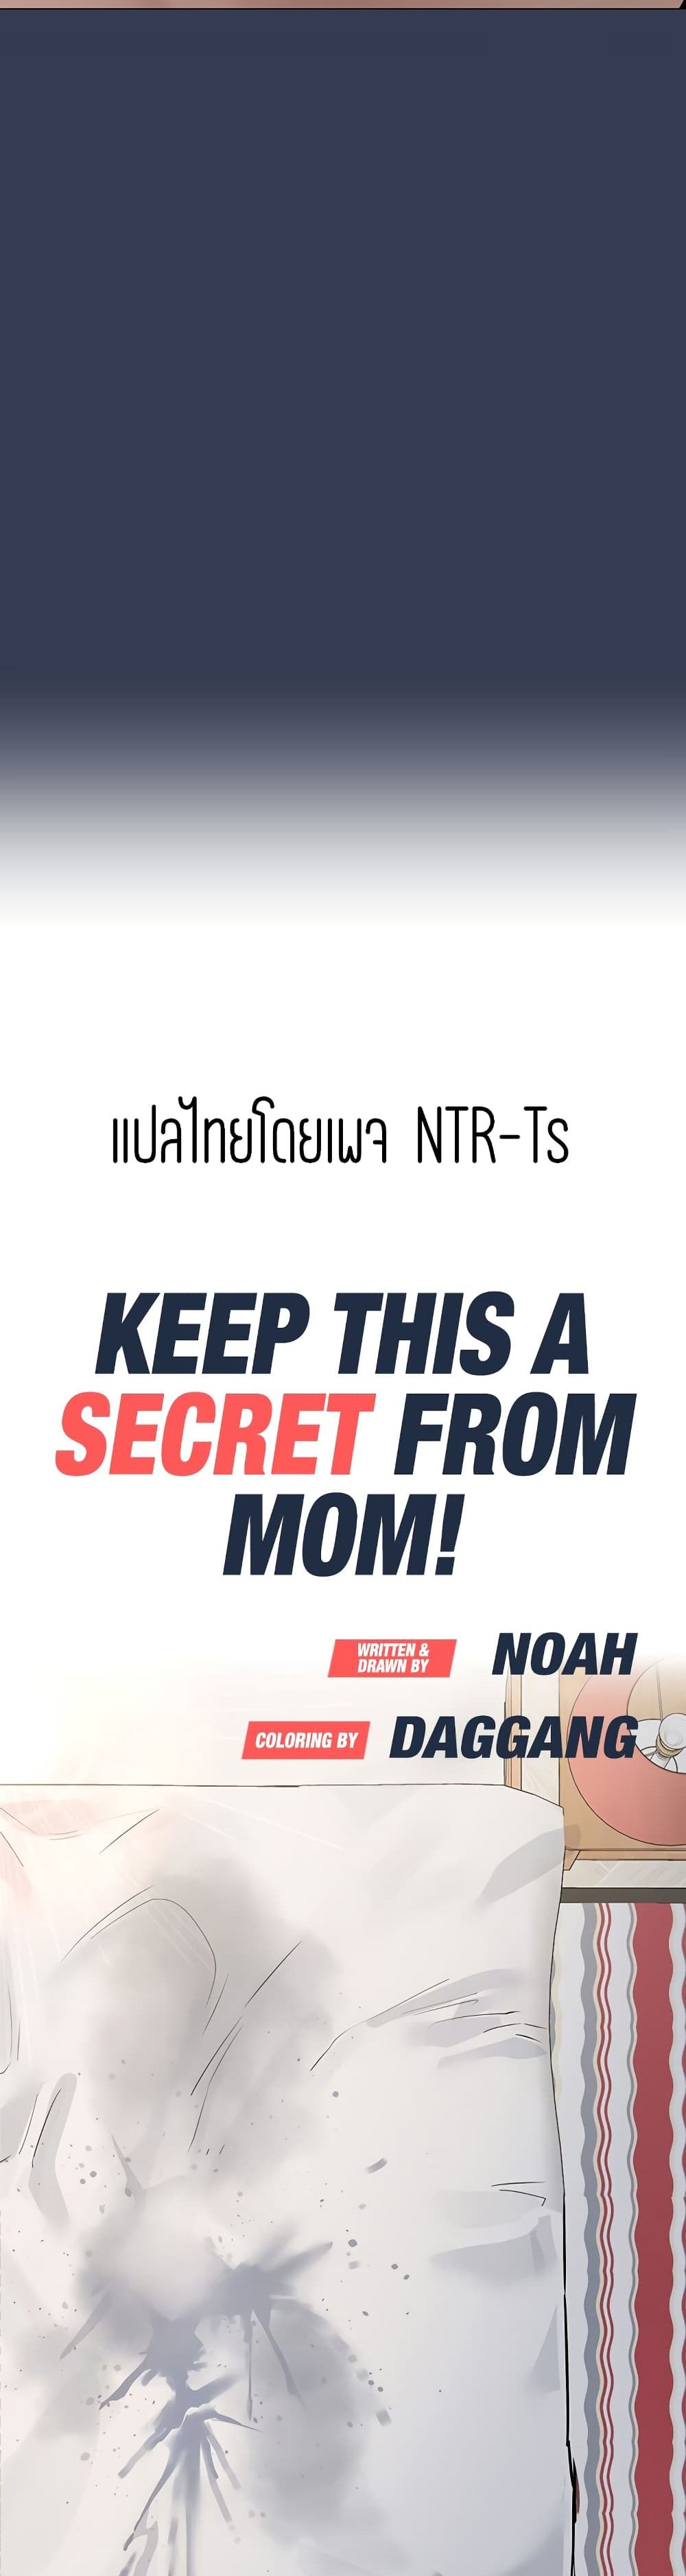 Keep it A Secret from Your Mother! 49-49